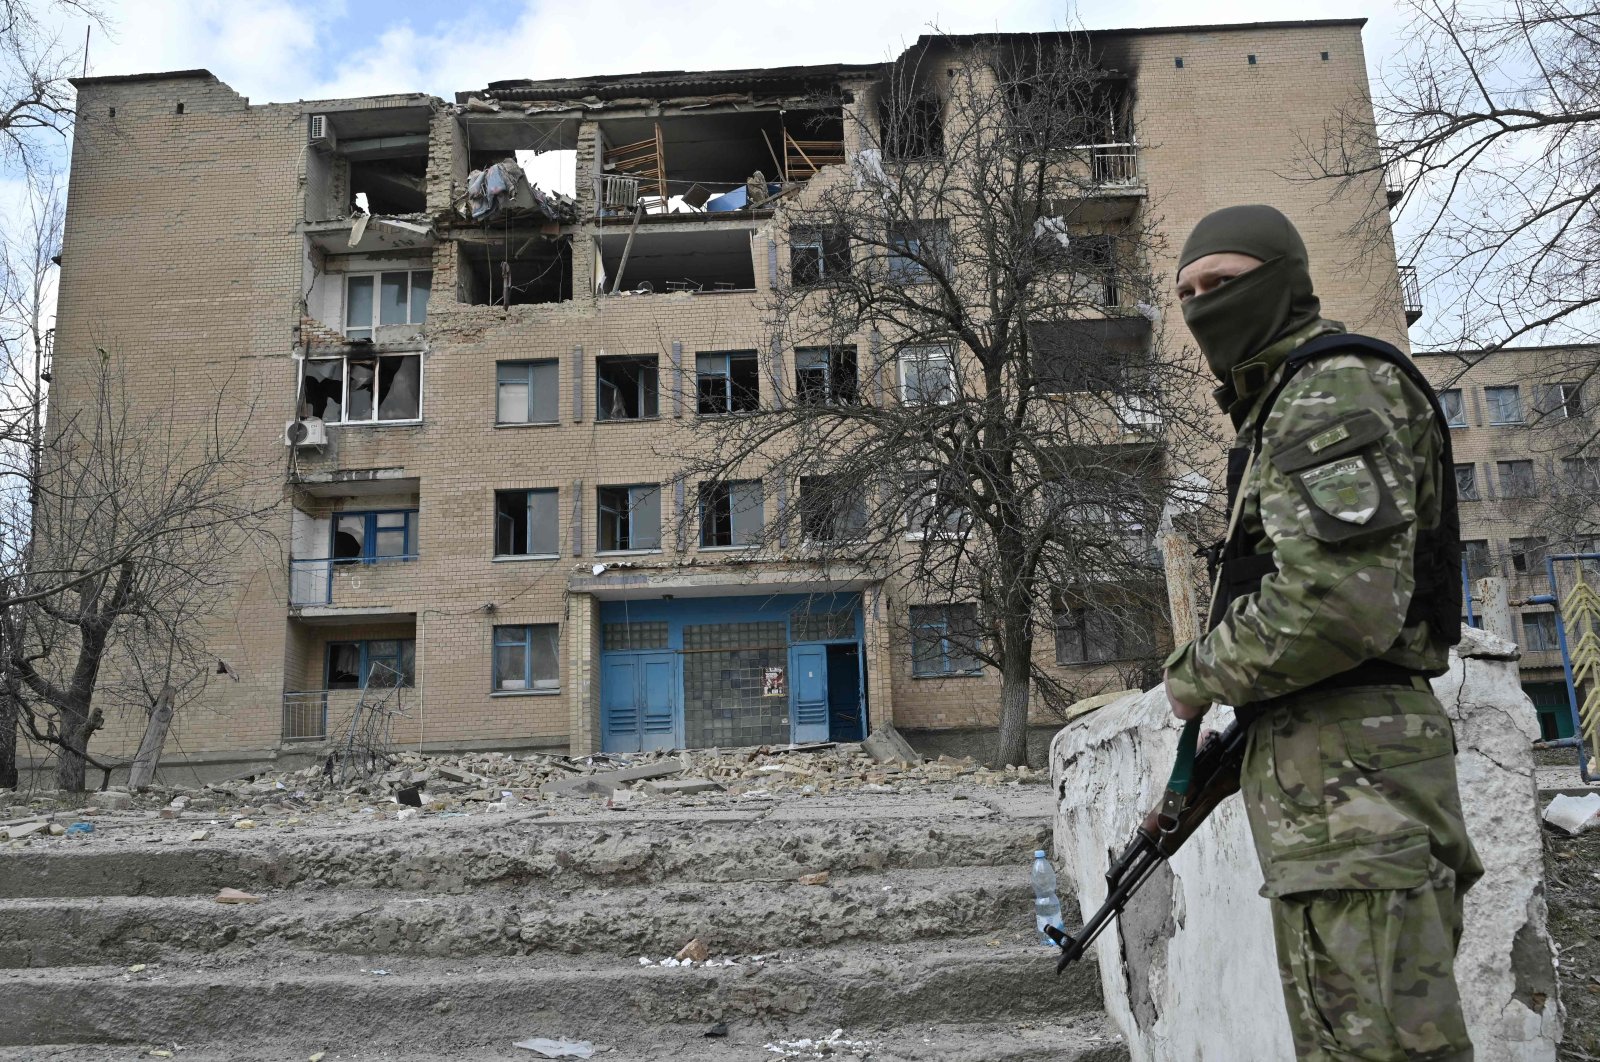 A Ukrainian police officer stands in front of a partially destroyed building after an airstrike in the town of Rzhyshchiv, in the Kyiv region, Ukraine, March 22, 2023. (AFP Photo)